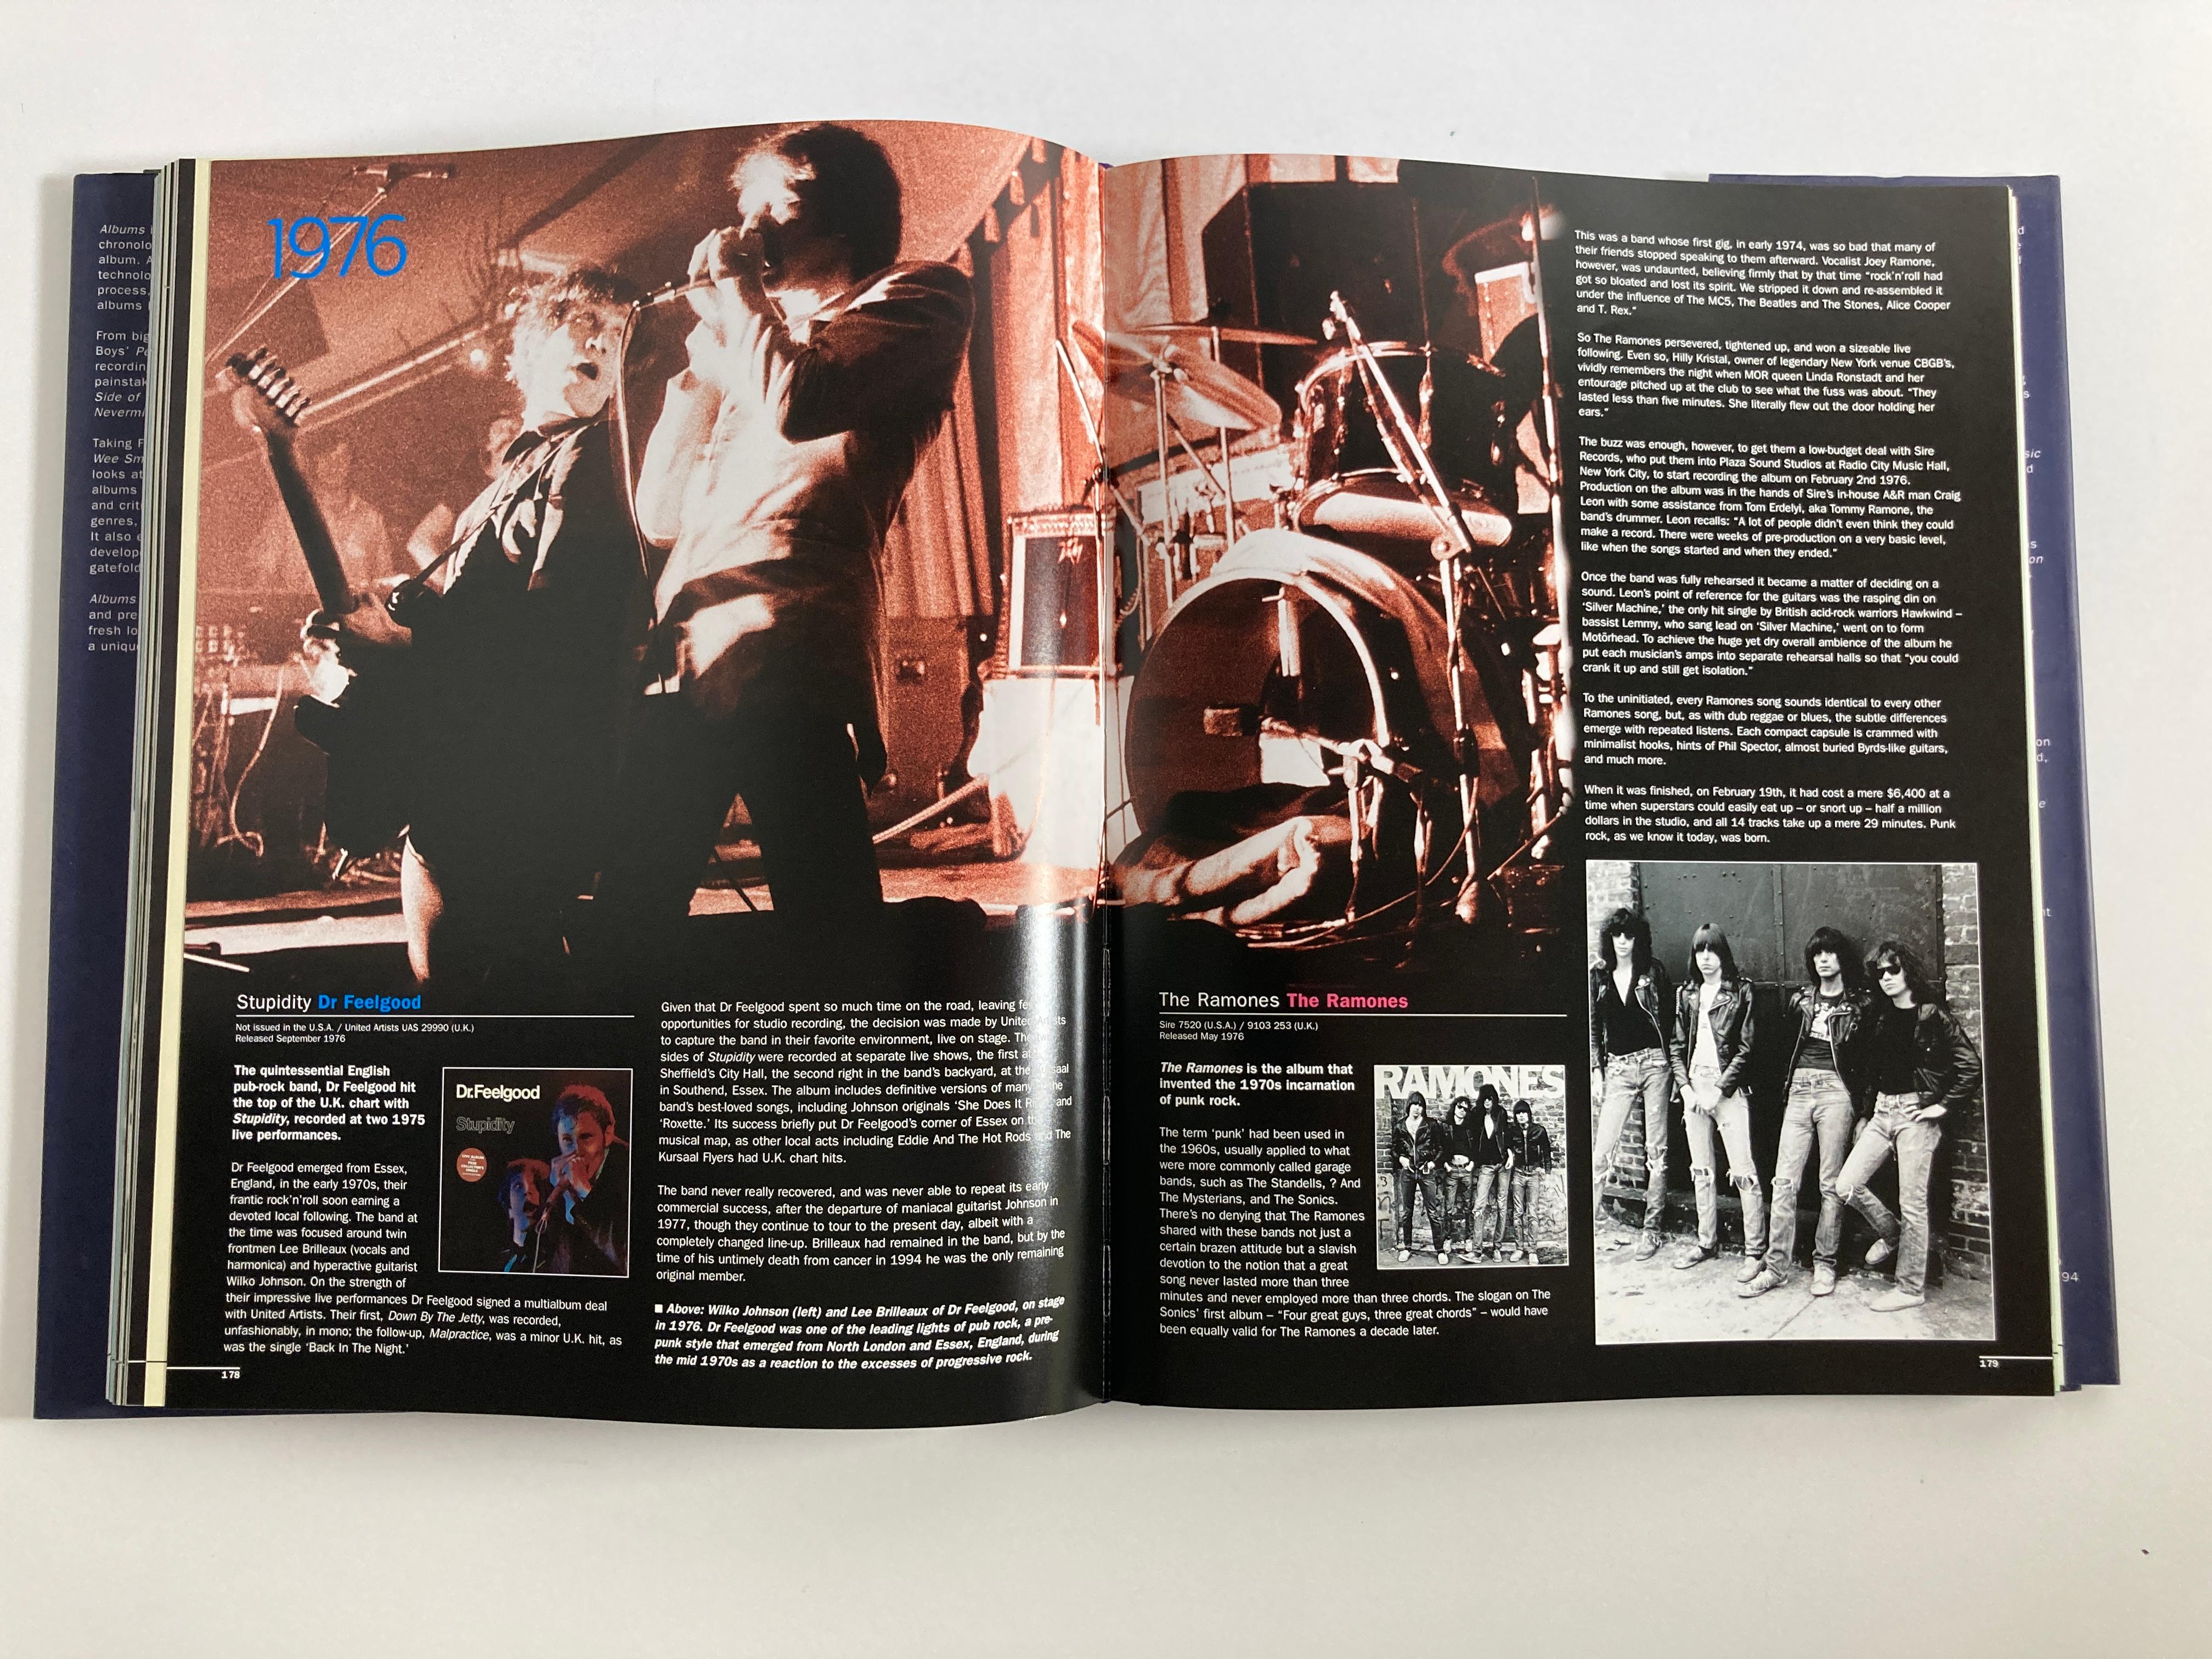 The Stories Behind 50 Years of Great Recordings Hardcover Table Book 1